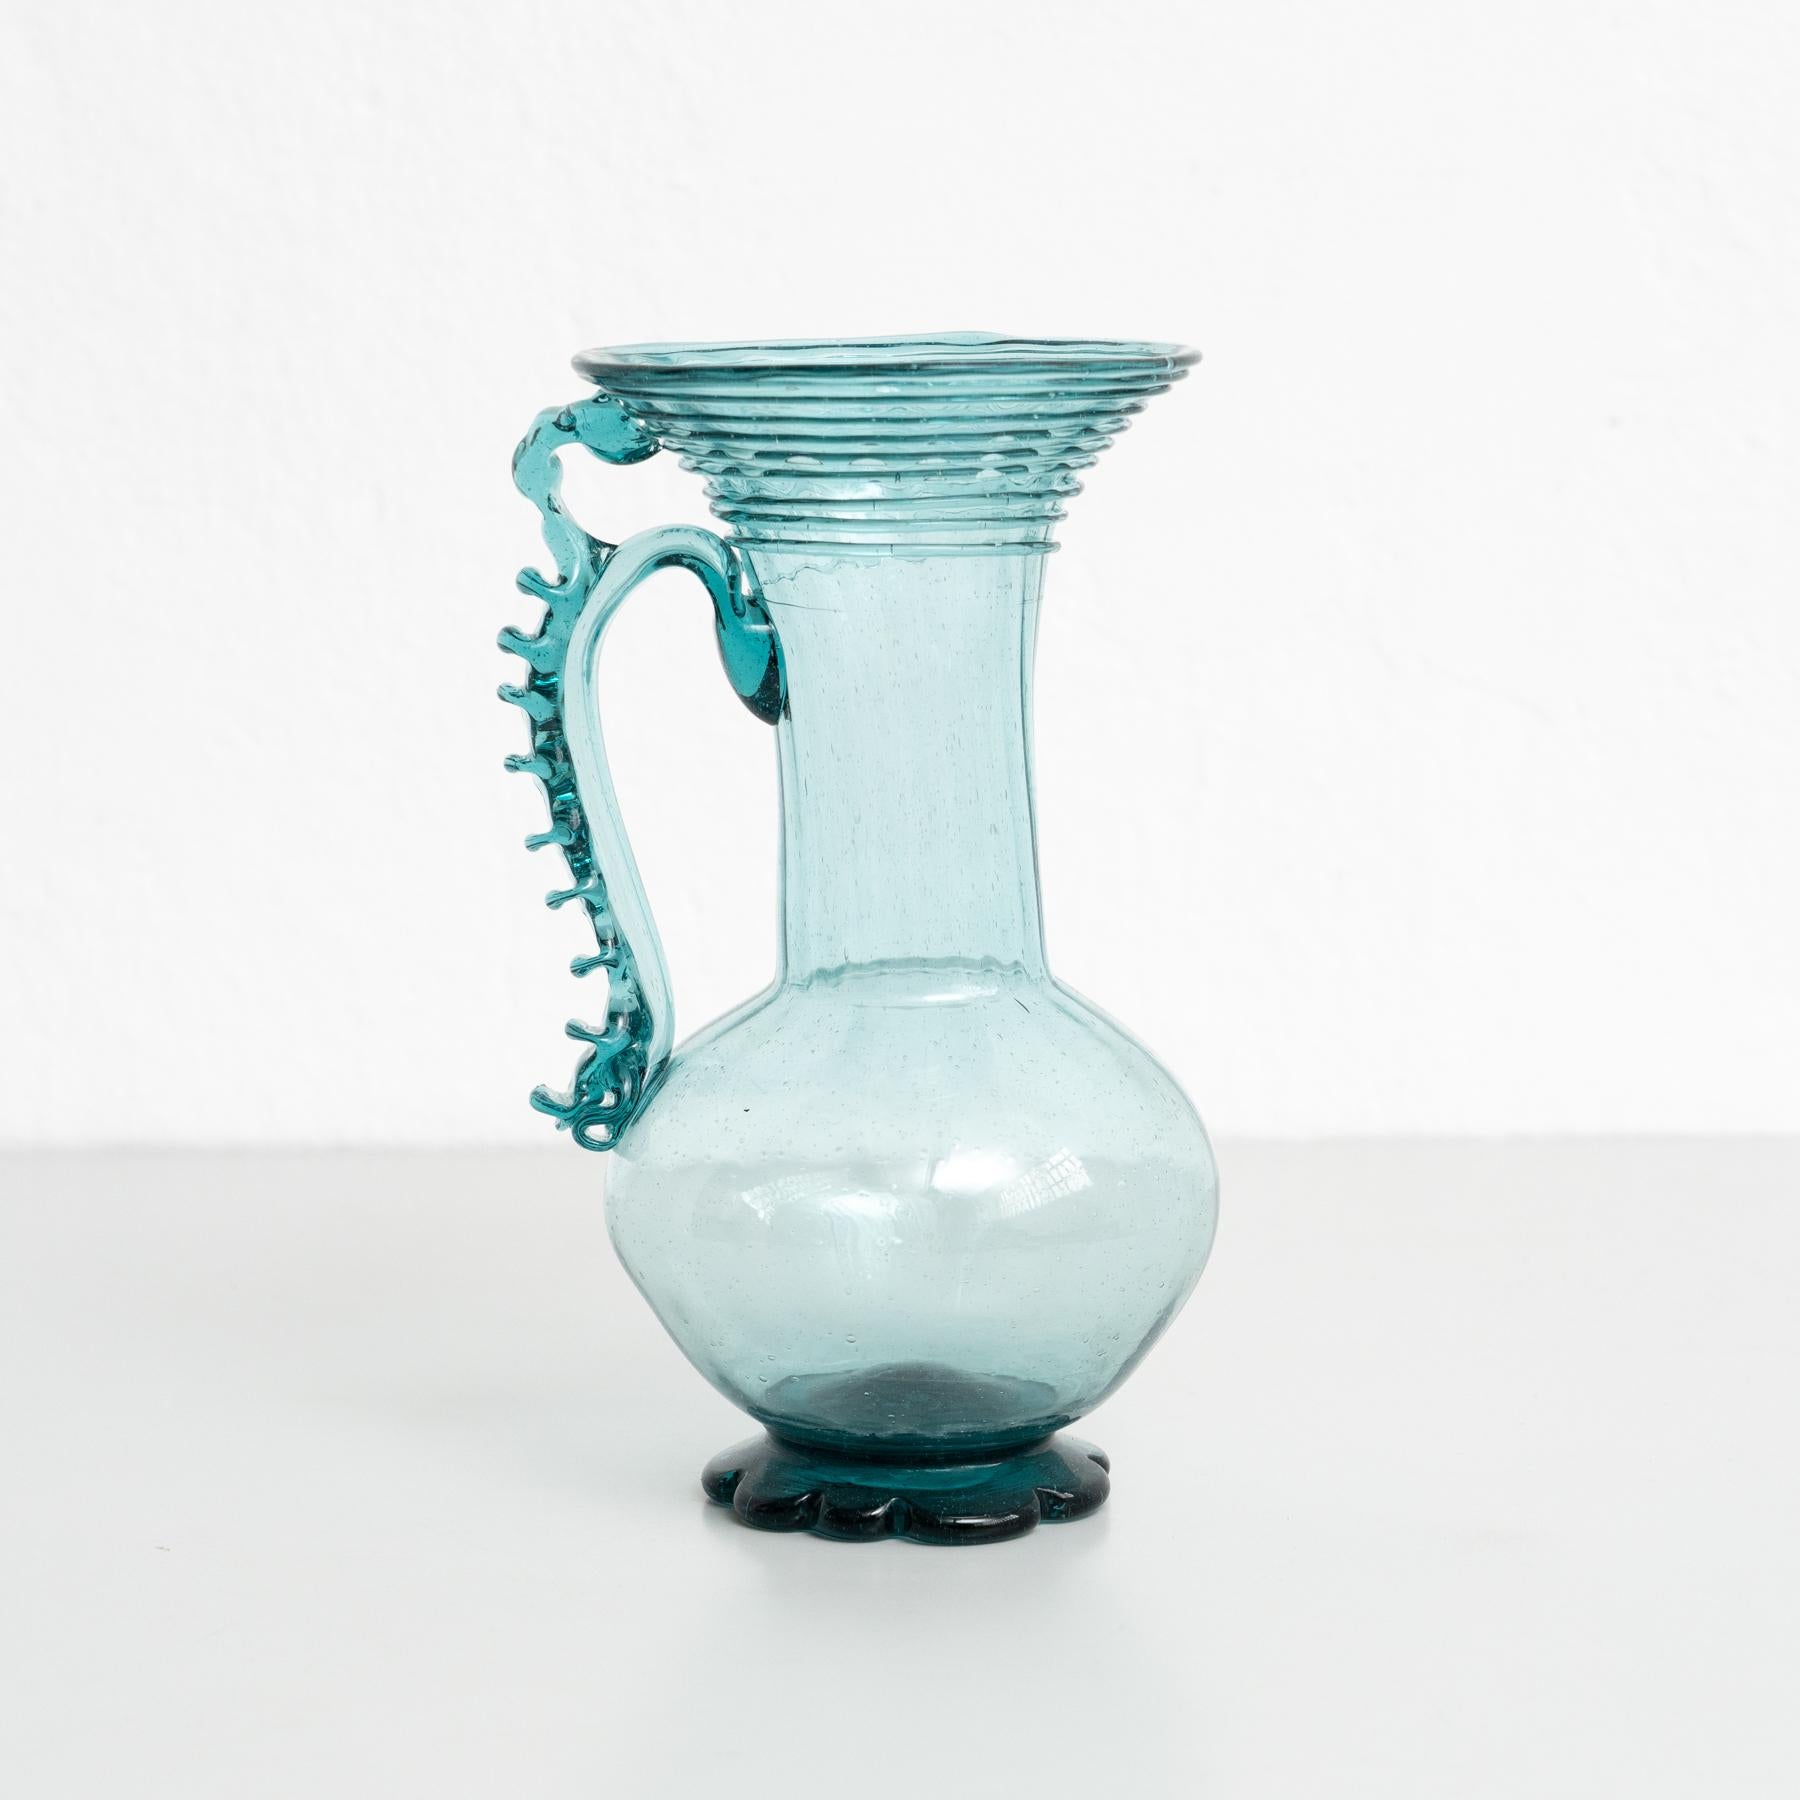 Exceptional Blown Glass Vase - Early XXth Century - Spanish Craftsmanship For Sale 2